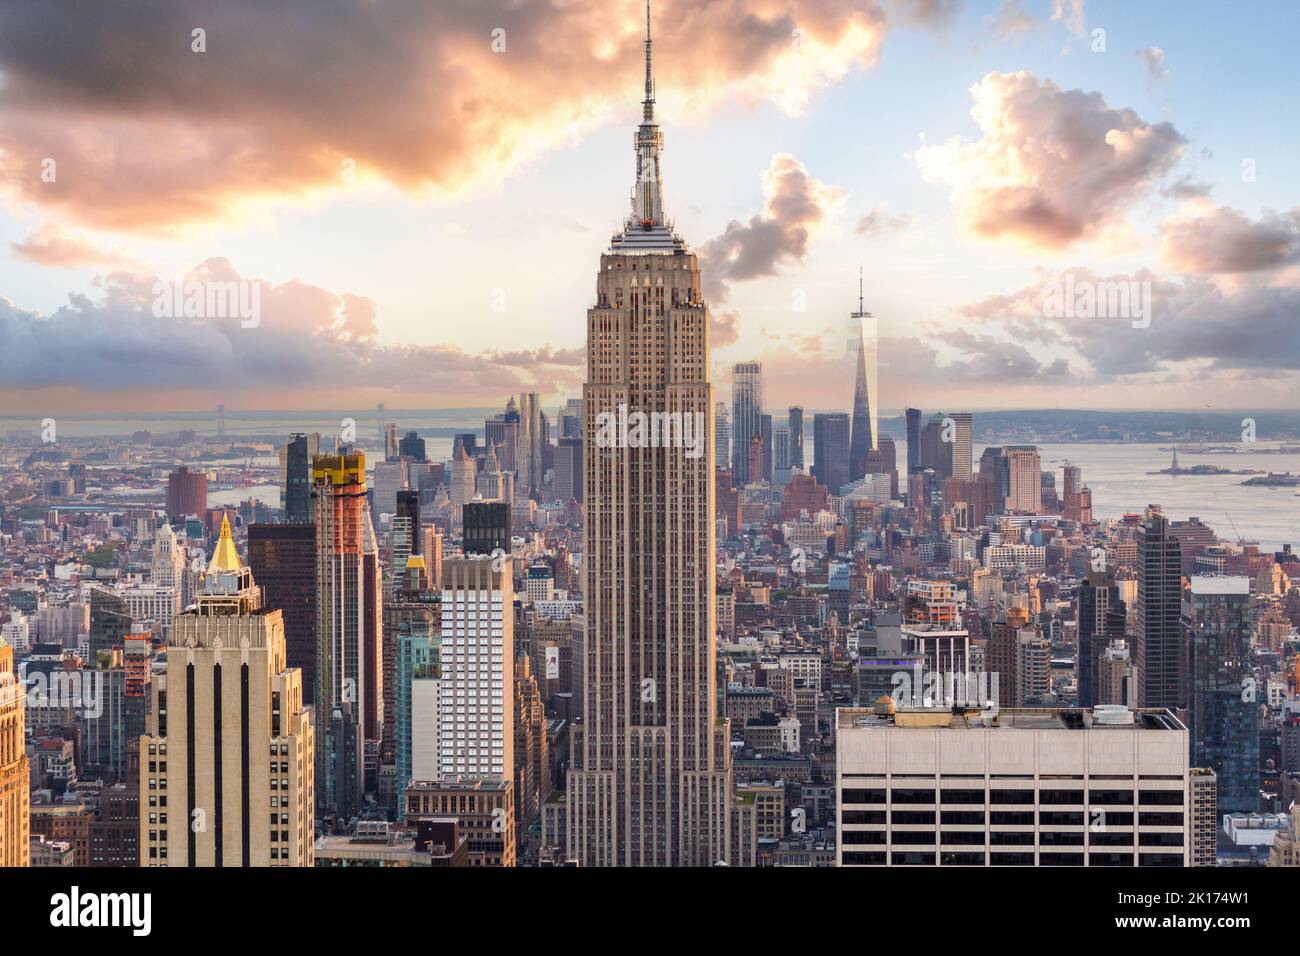 Panorama view of New York city skyline and skyscrapers at sunset Stock Photo